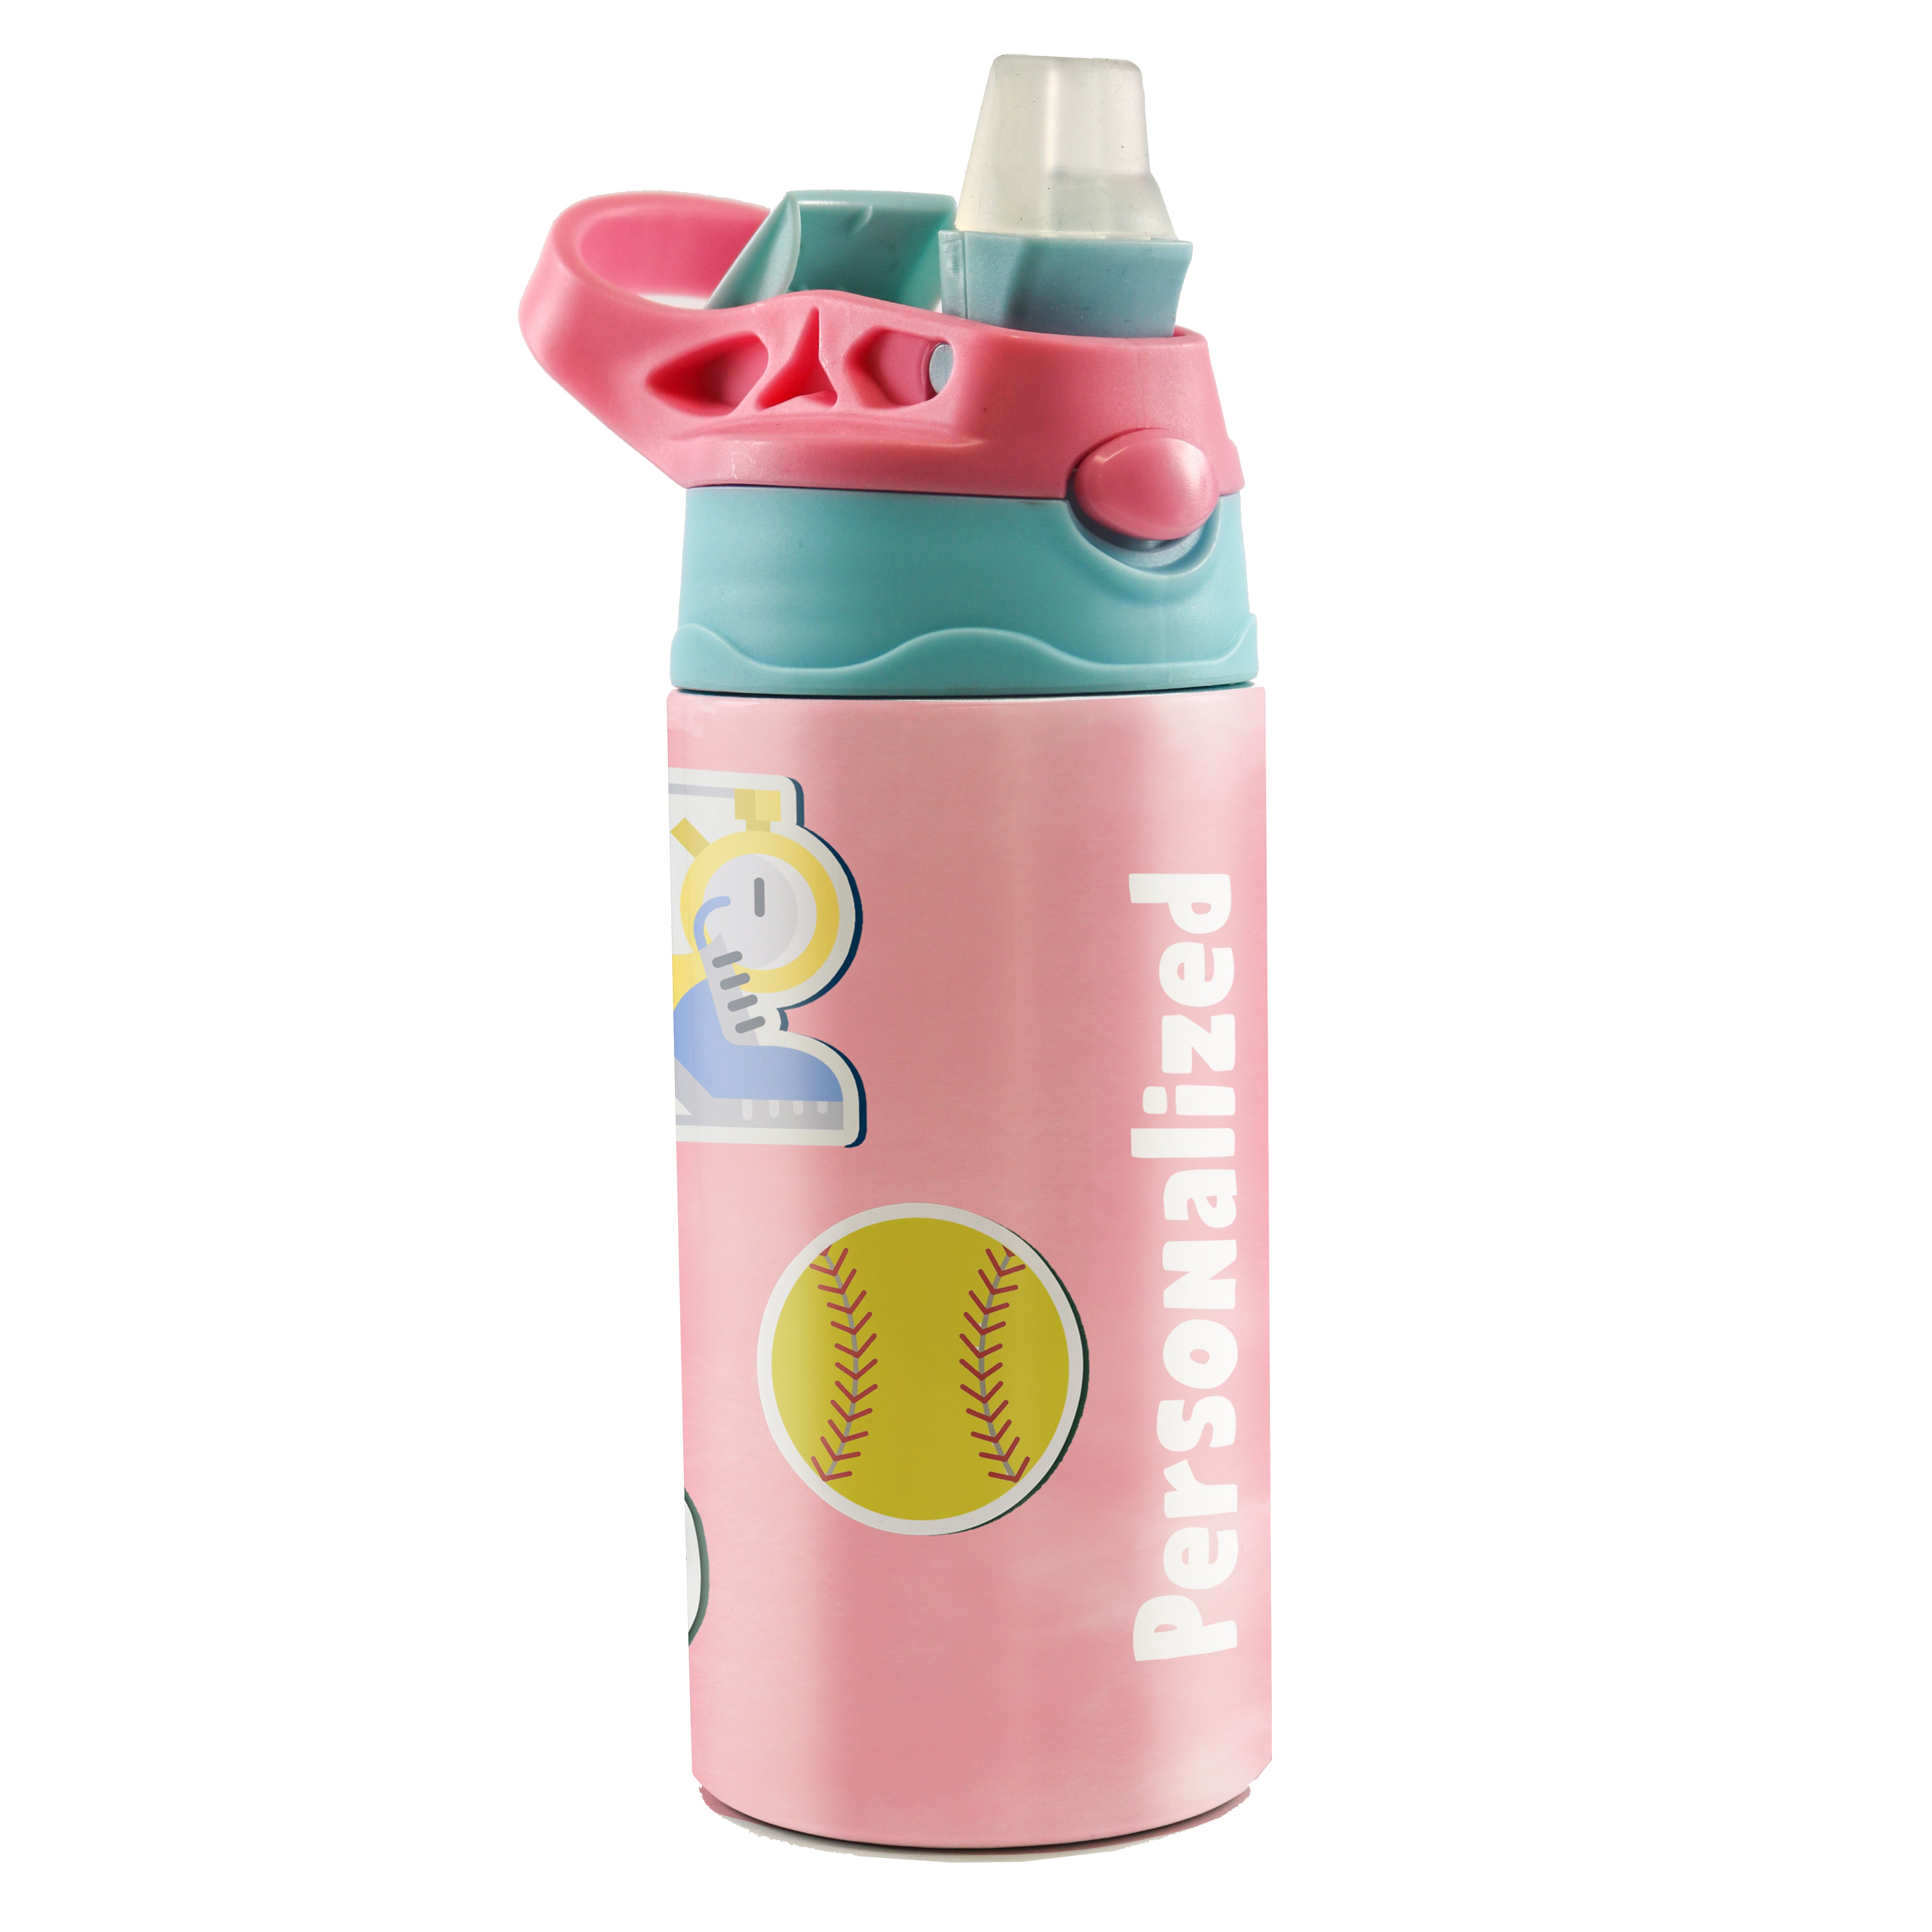 Sports Collection (Stickers - Personalize with Name) 12 oz Stainless Steel Water Bottle with Pink and Blue Lid